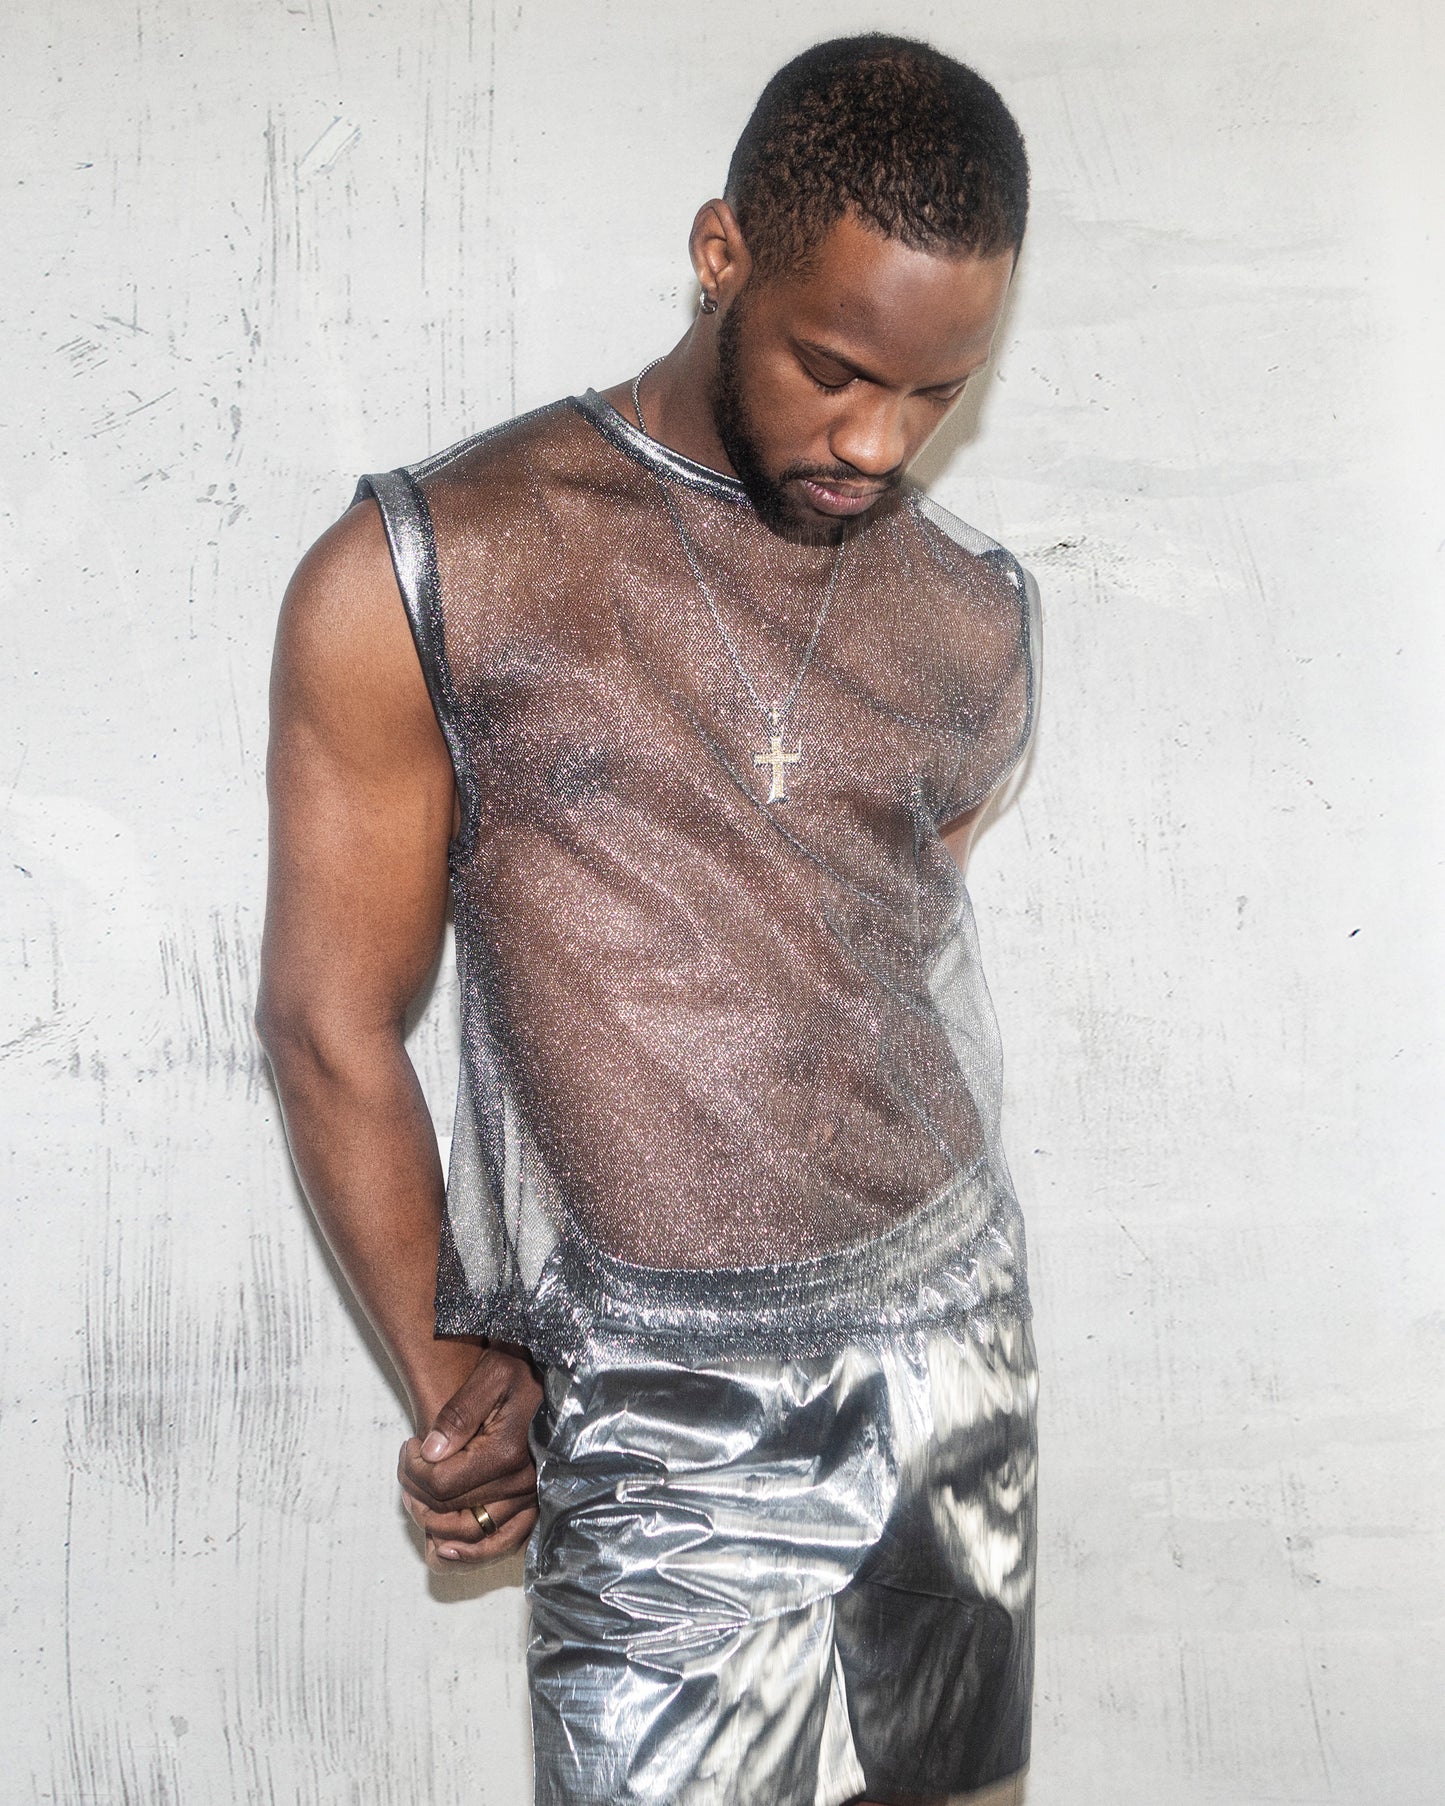 Men’s Silver Glitter Mesh Sleeveless Tank Top for Rave, Party, and Festival Looks; Shimmering Style | MASK4MASK